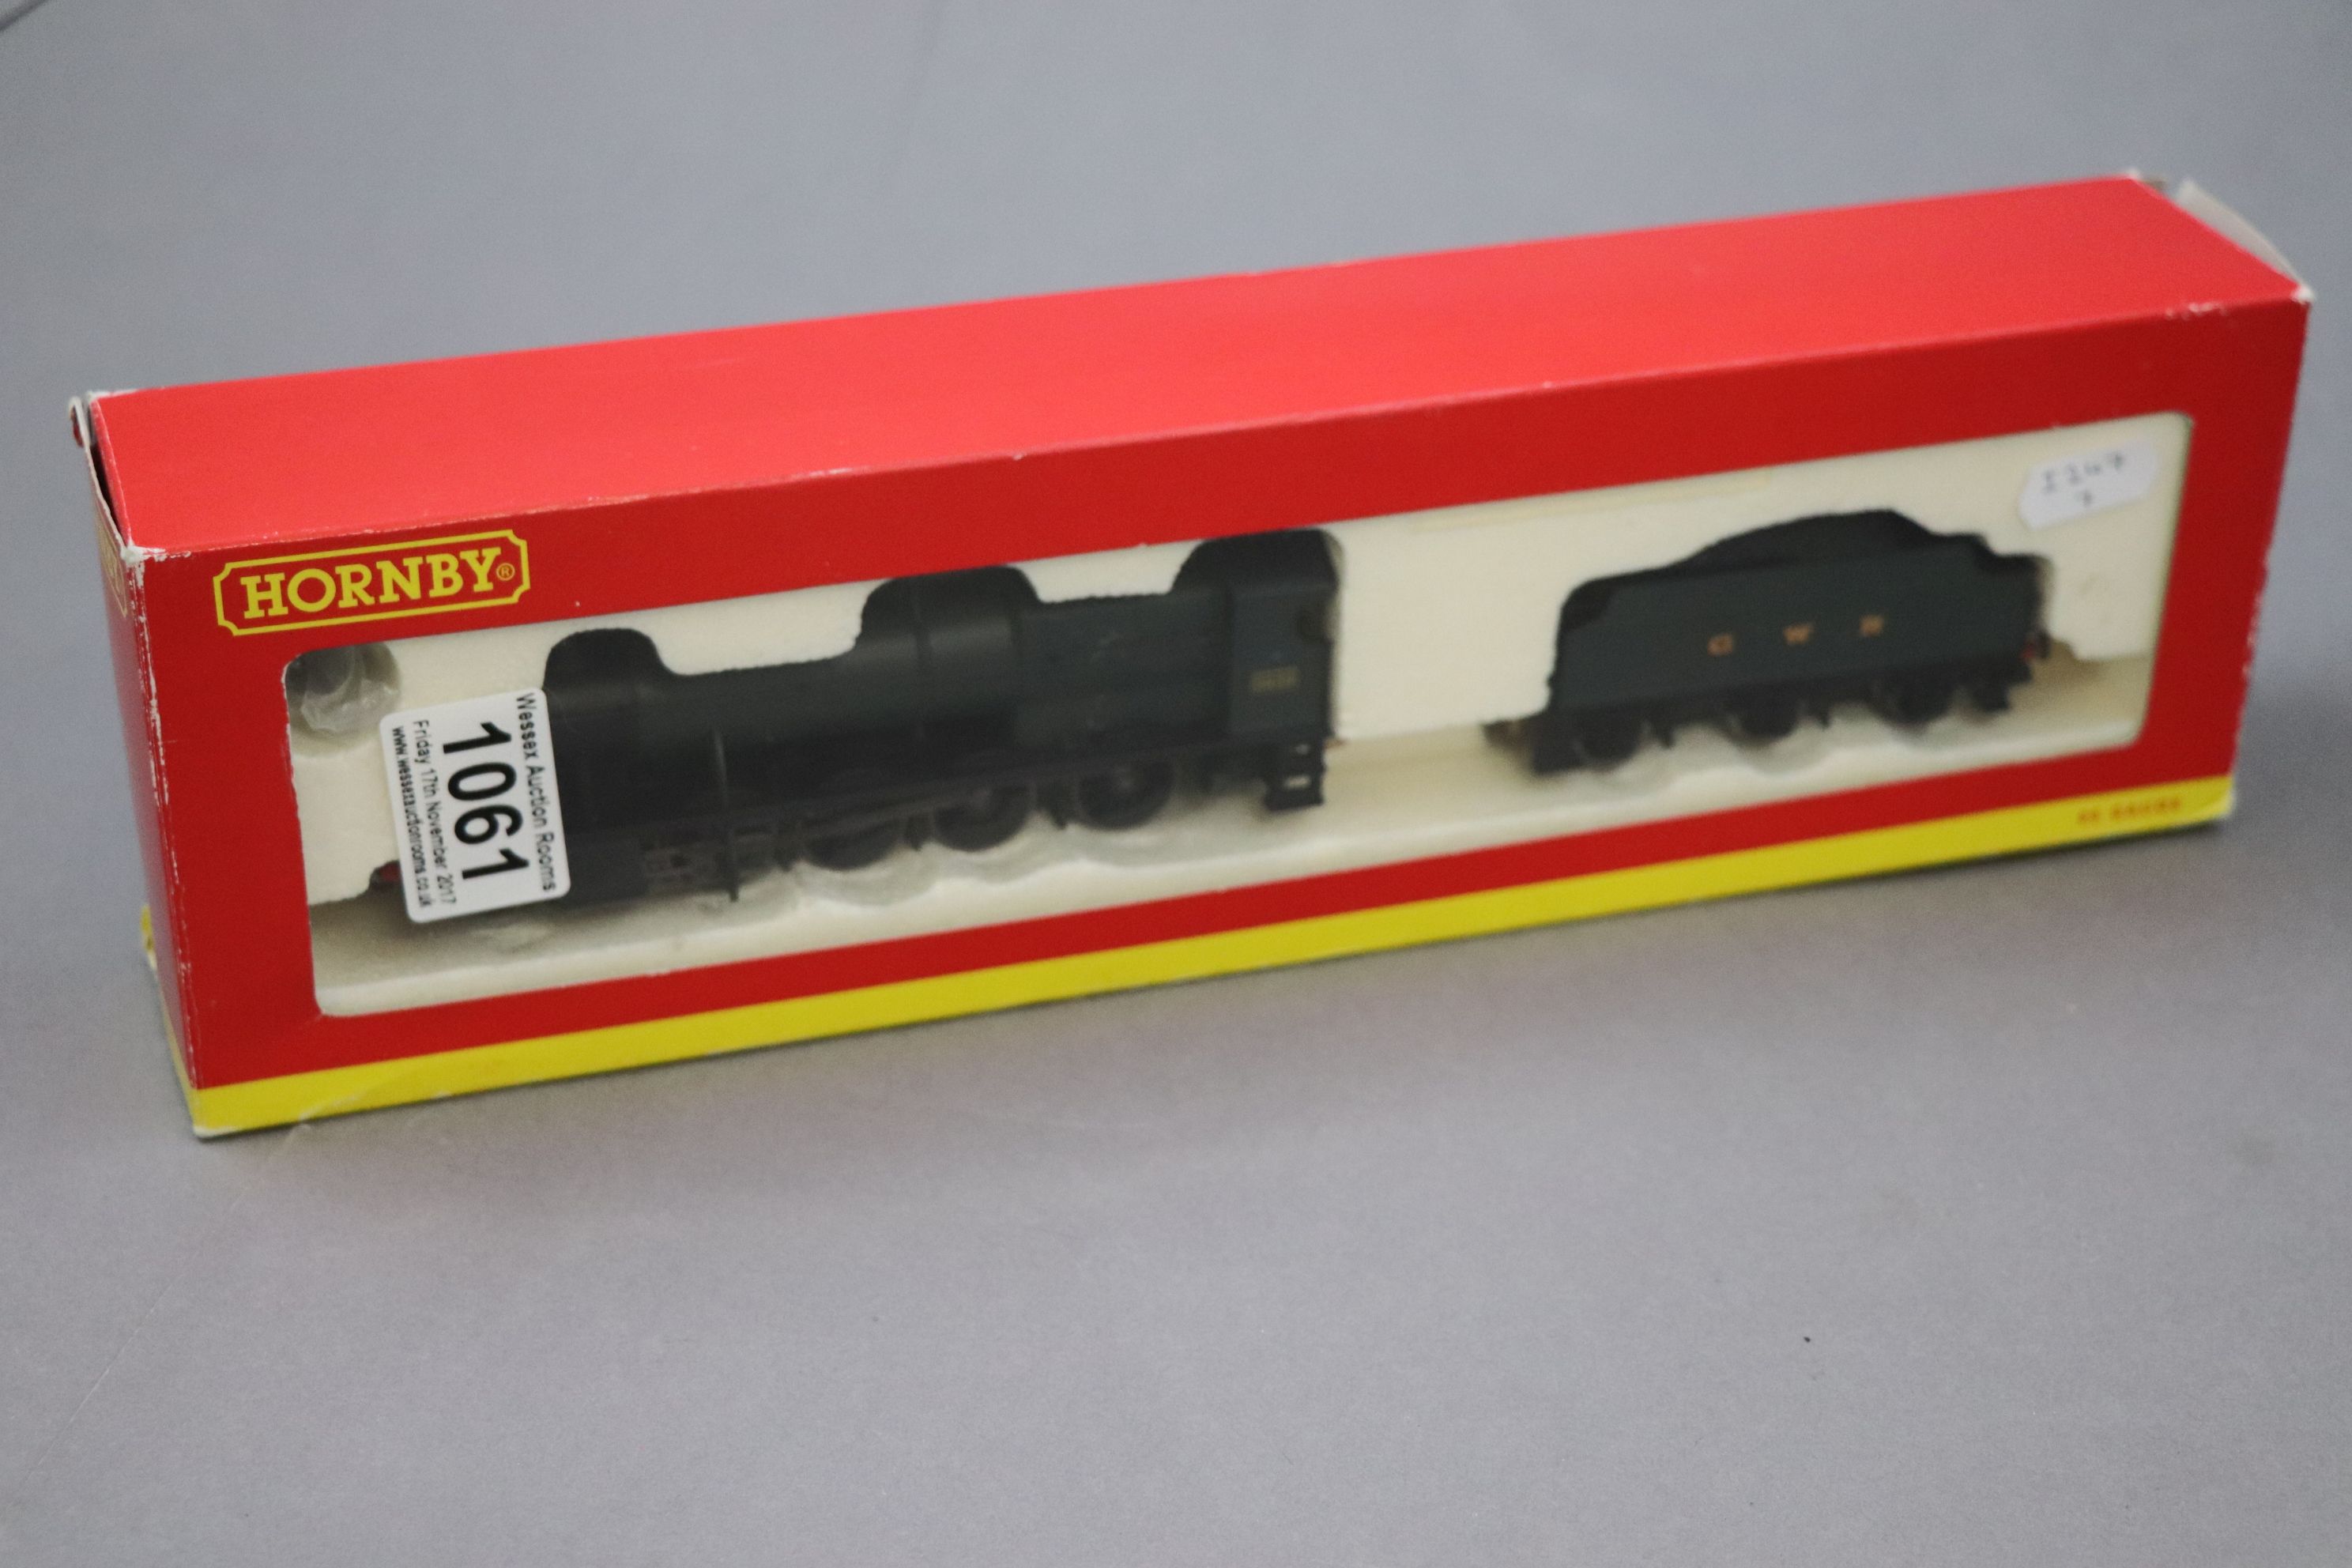 Boxed Hornby OO gauge R2153B GWR 2-8-0 Class 2800 Locomotive 2839 - Image 3 of 4